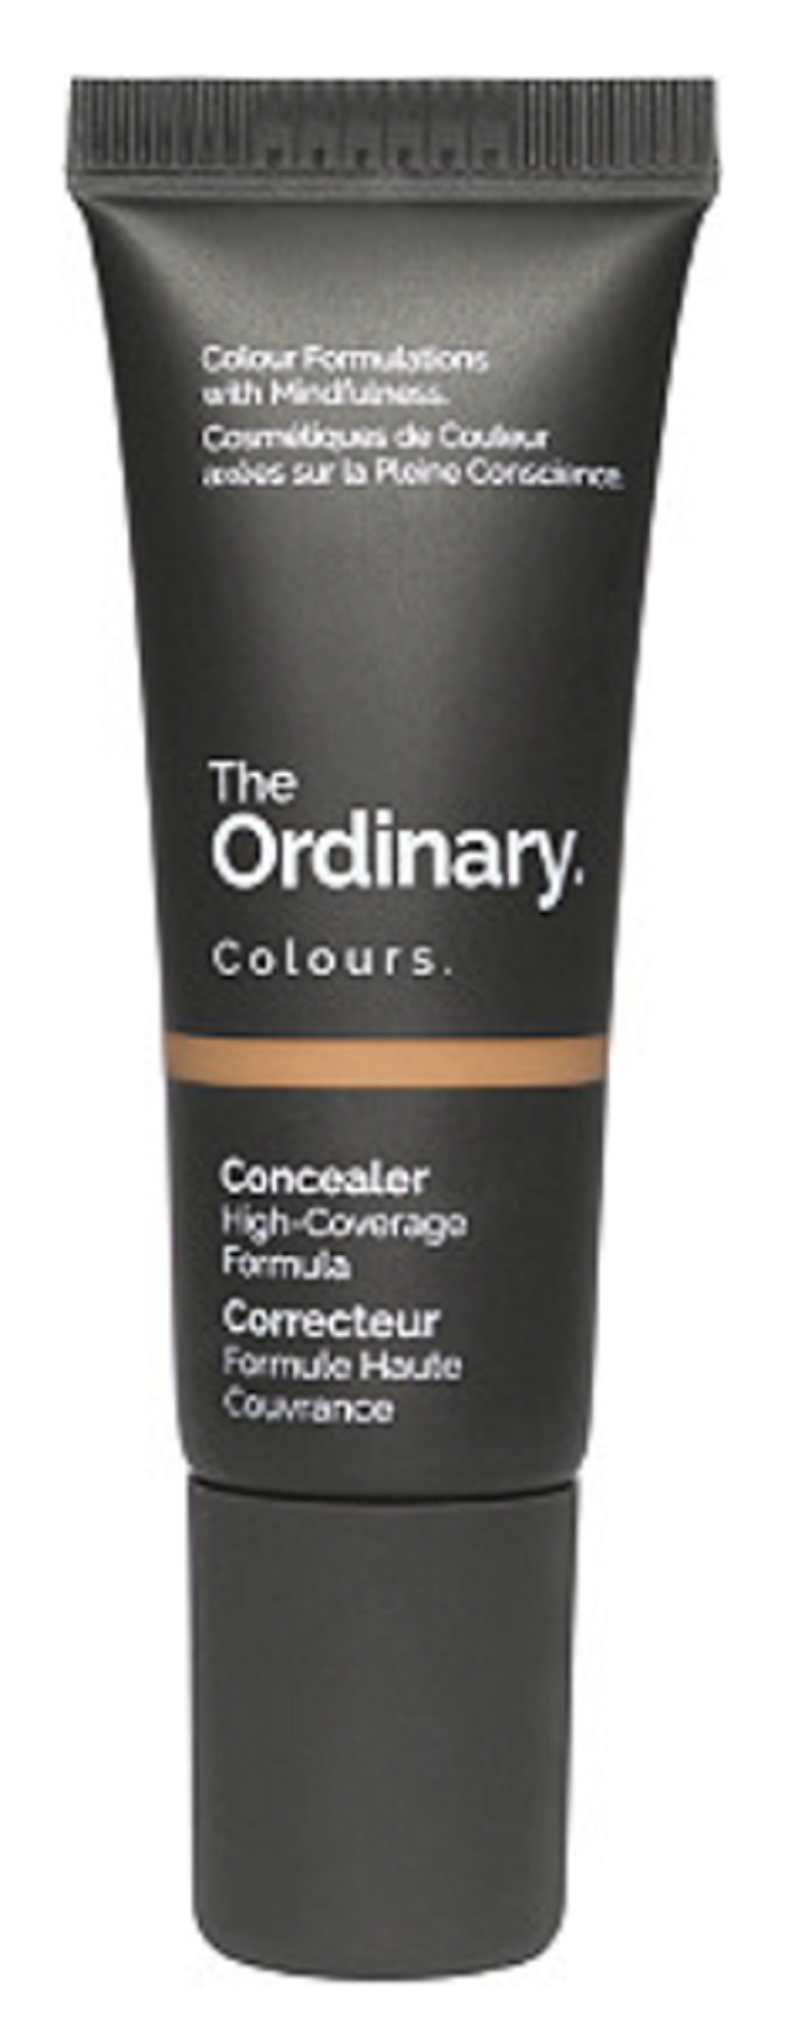 Cheap Concealer: The Ordinary Concealer 